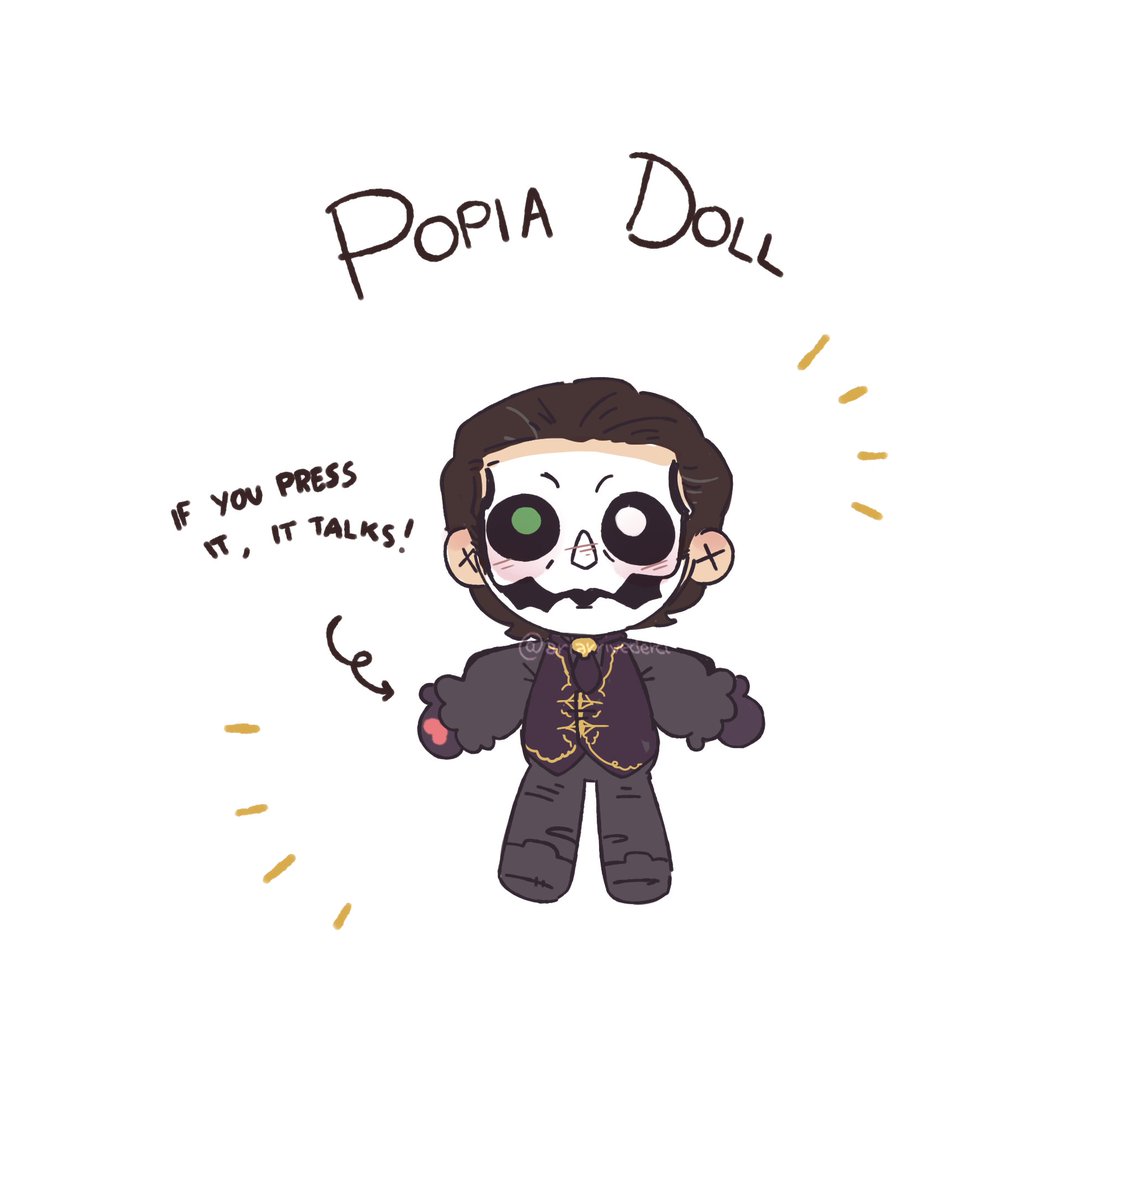 little doll guy (he's totally not cursed)
#cardinalcopia #GhostBand #thebandghost  #papaemeritusiv